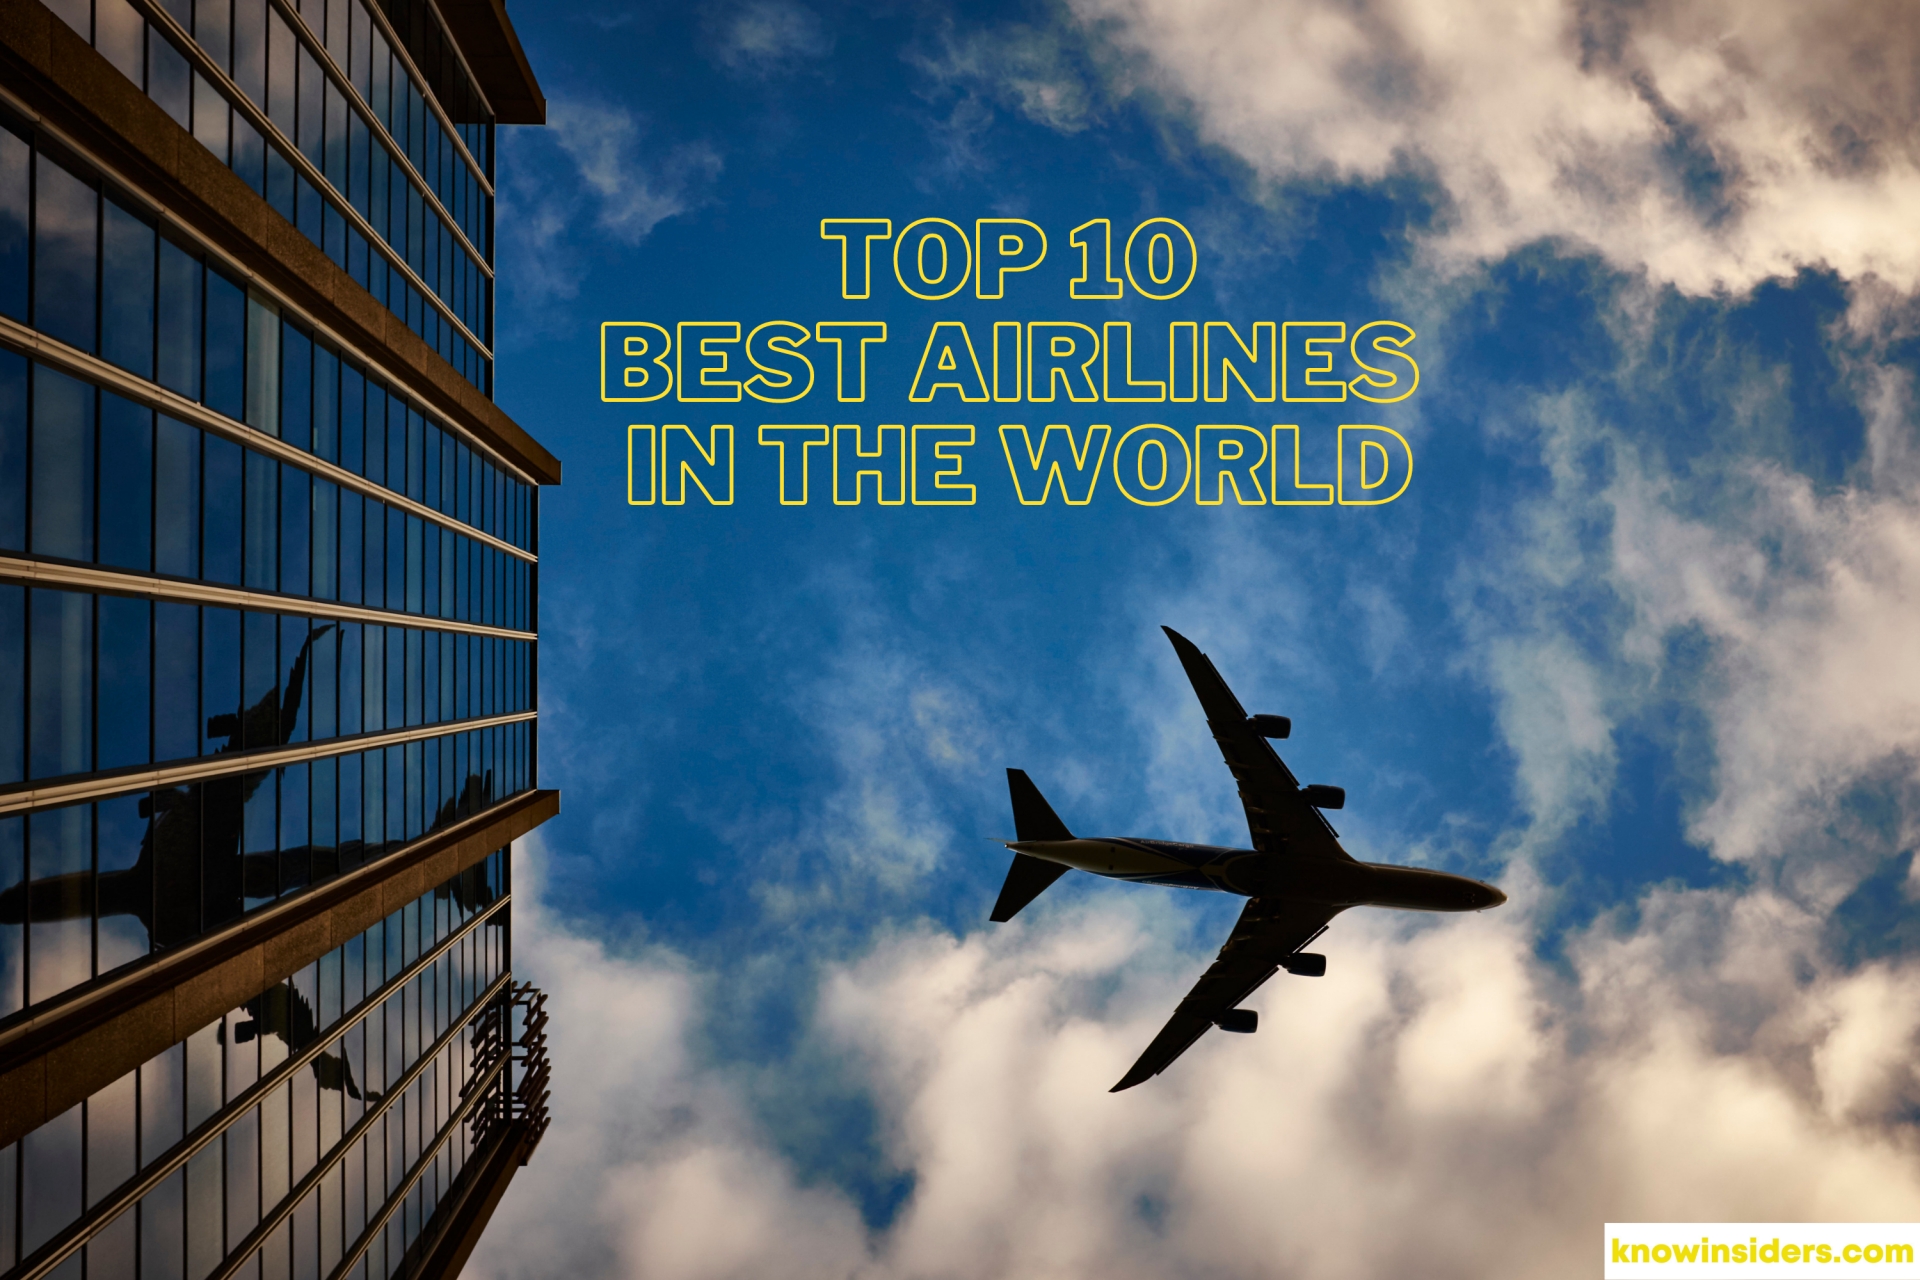 Top 10 Best Airlines In The World For 2021/22 - Skytrax